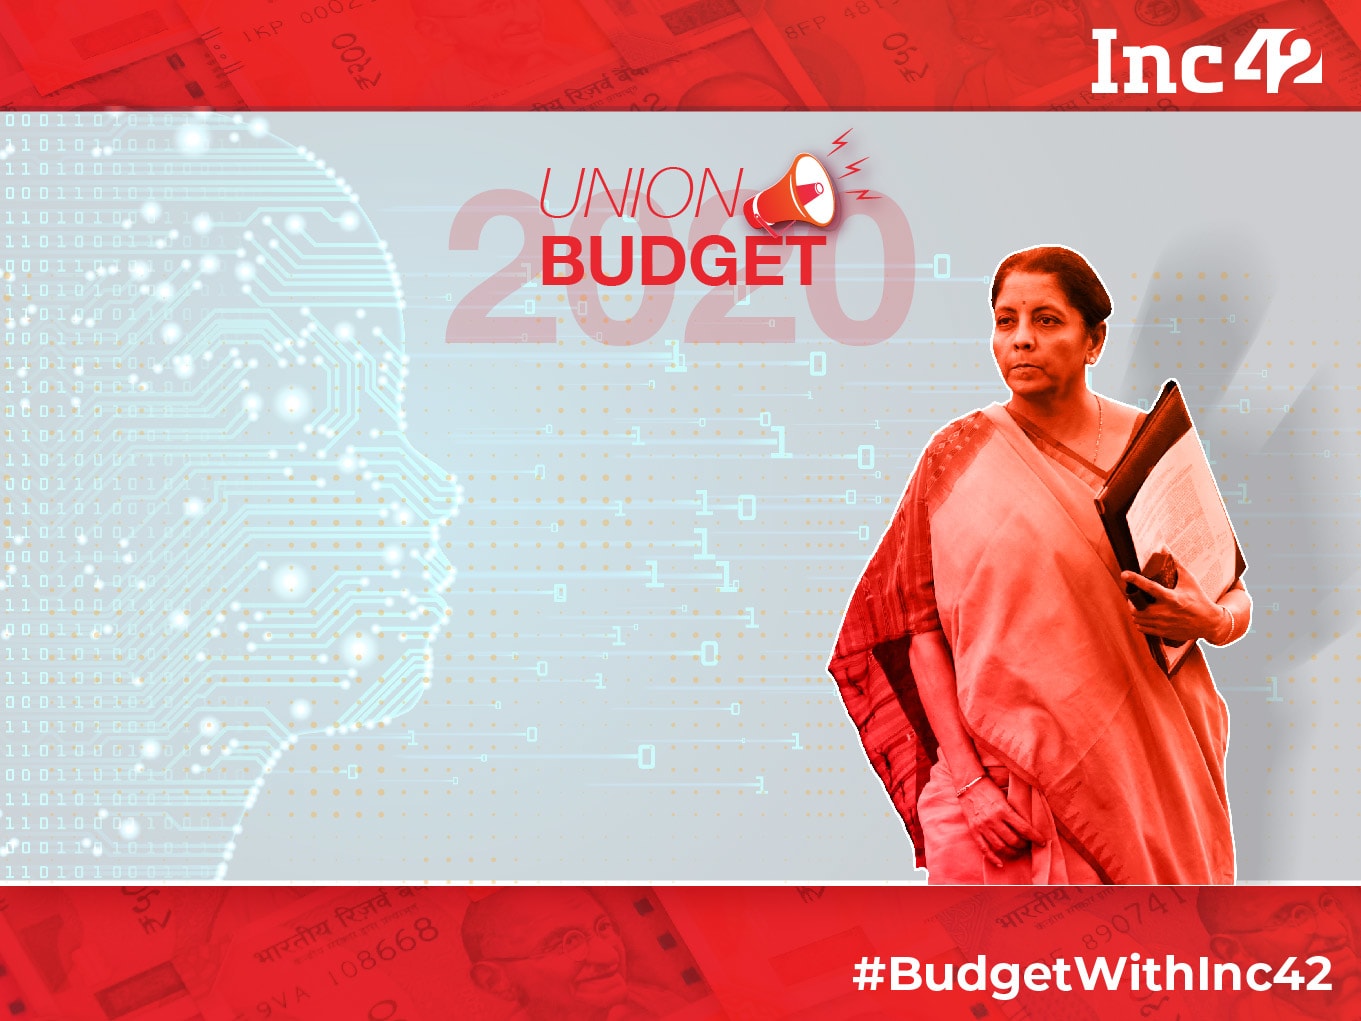 New age technologies budget 2020